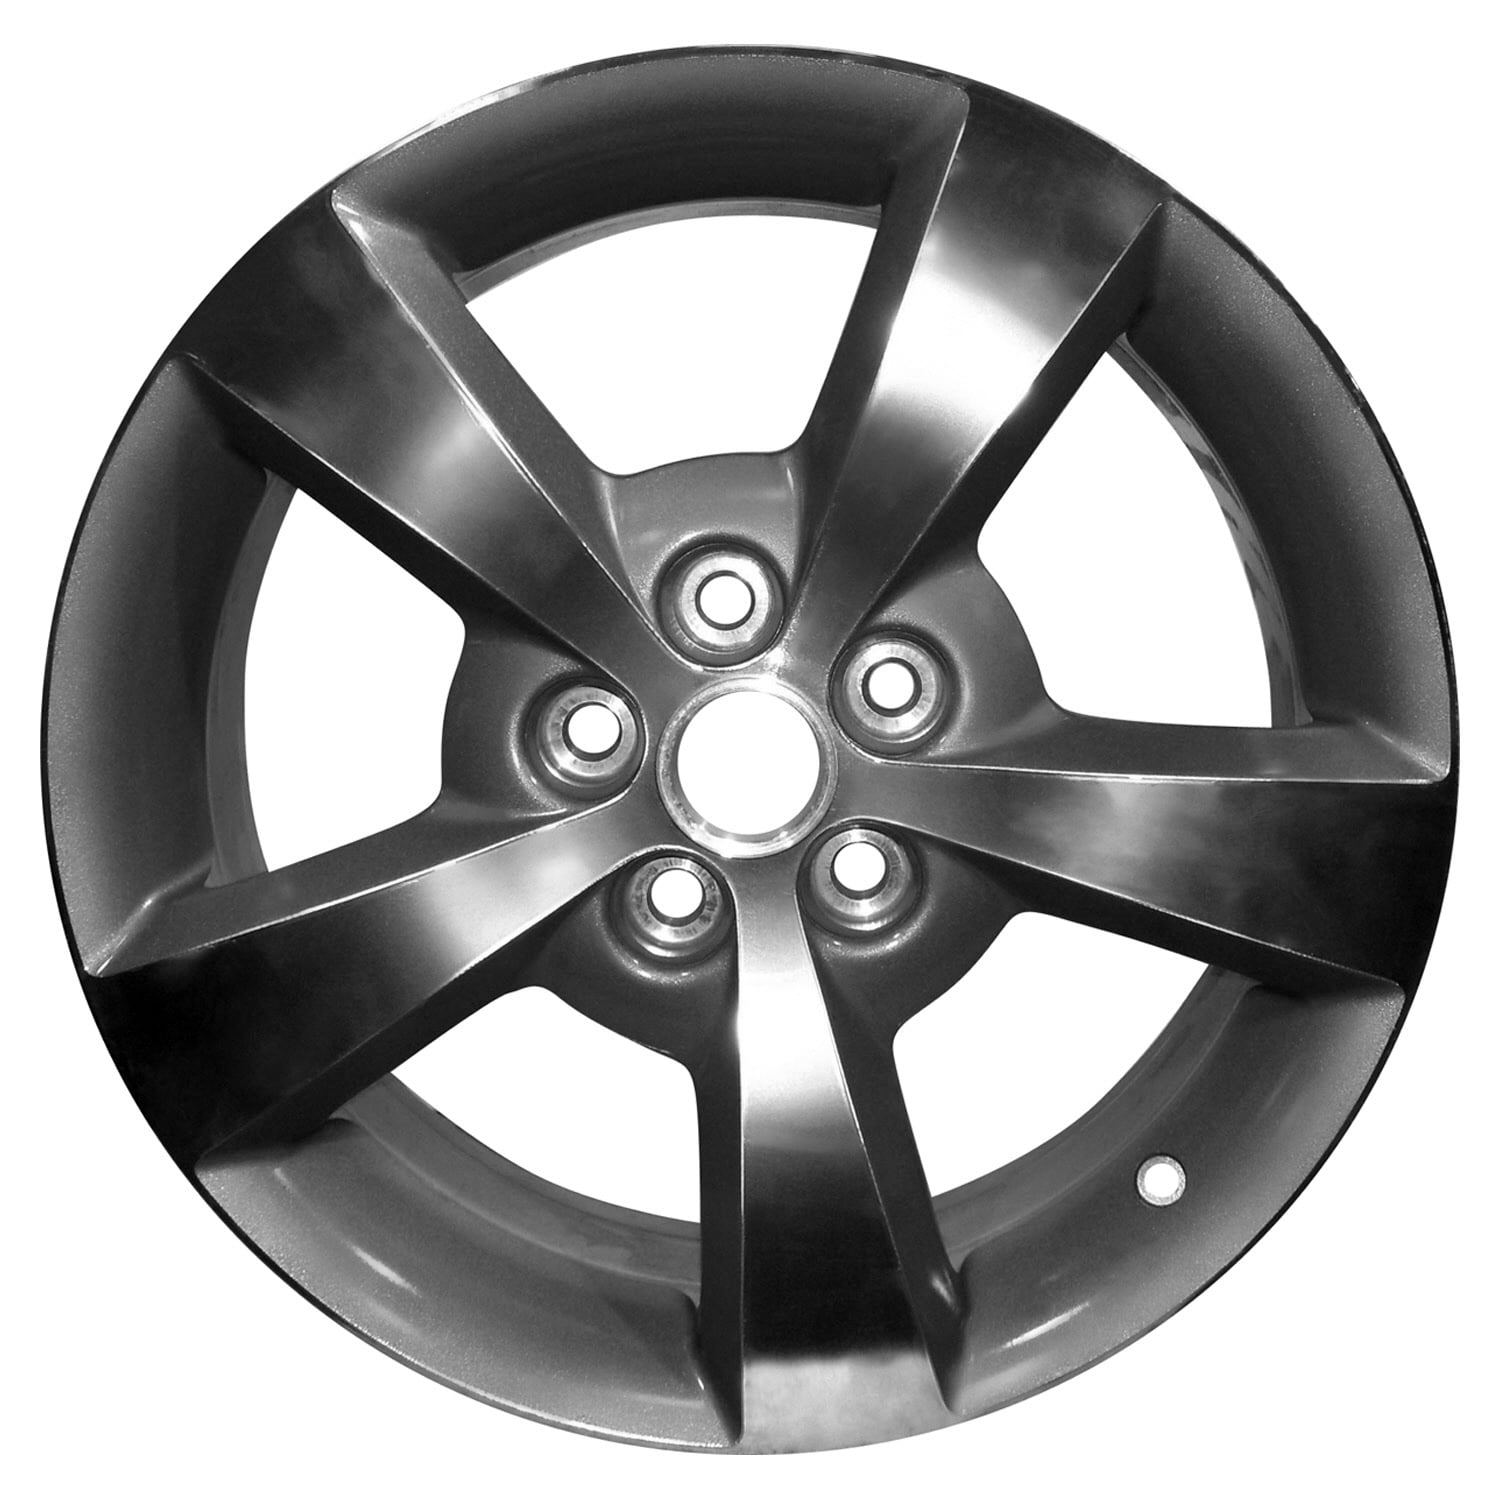 Replacement 5 Spokes Machined with Medium Charcoal Metallic Pockets Factory Alloy Wheel Compatible w 